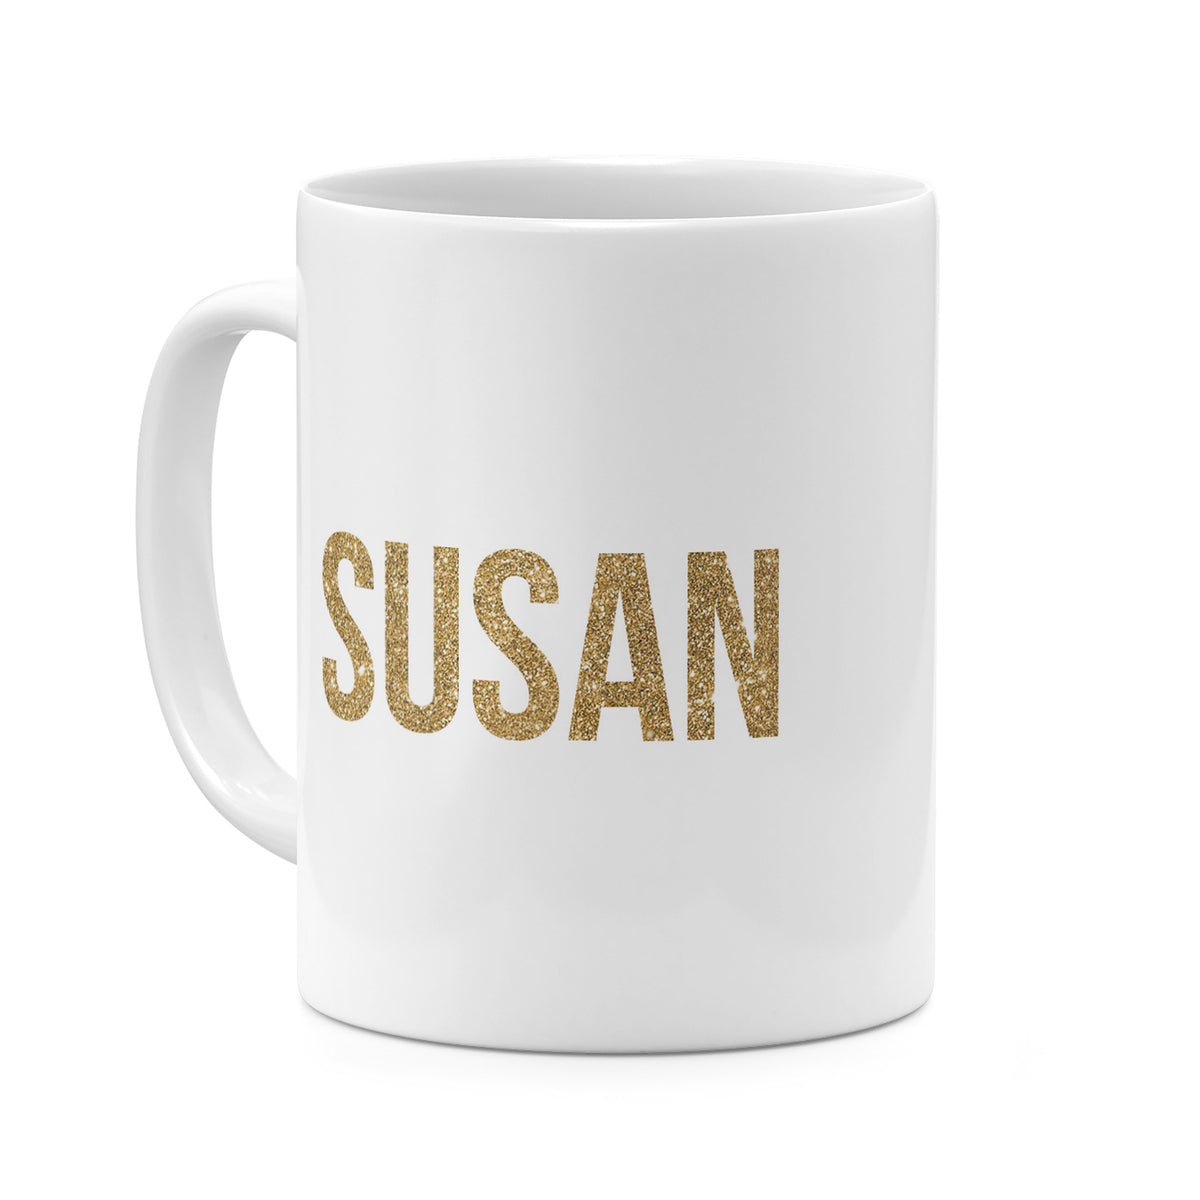 Personalised Ceramic Mug with Name Initials Text Big Bold Golden